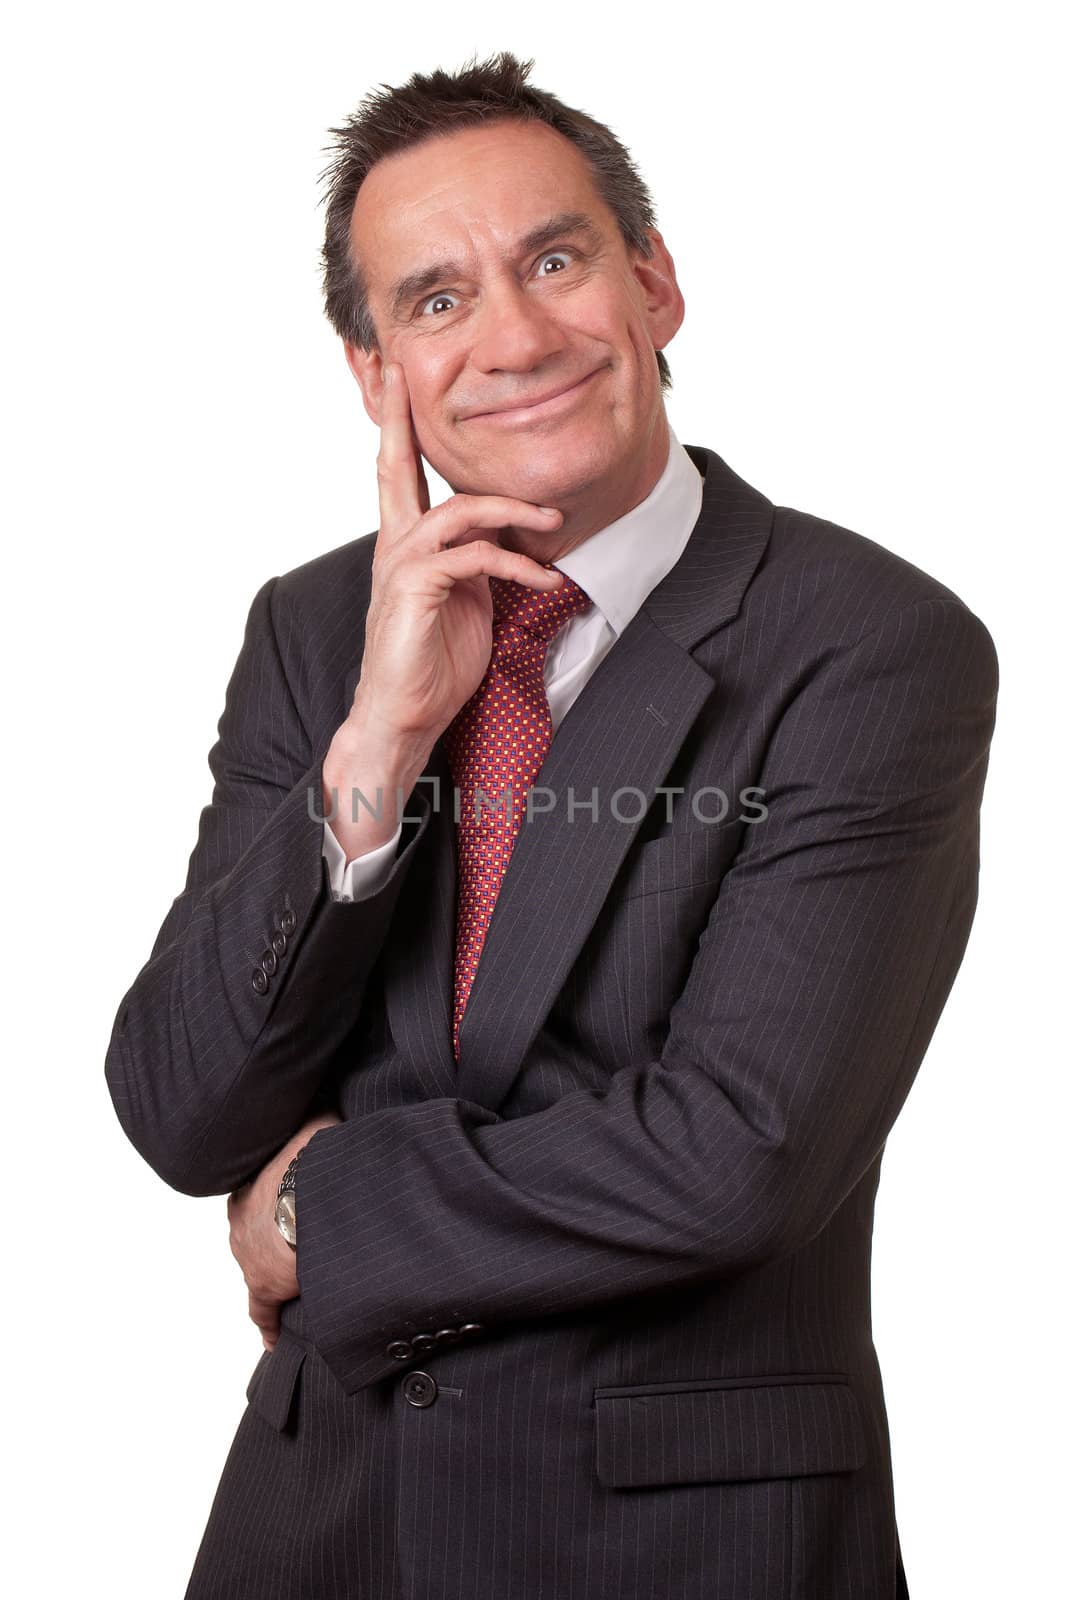 Business Man in Suit with Silly Grin and Hand to Face by scheriton